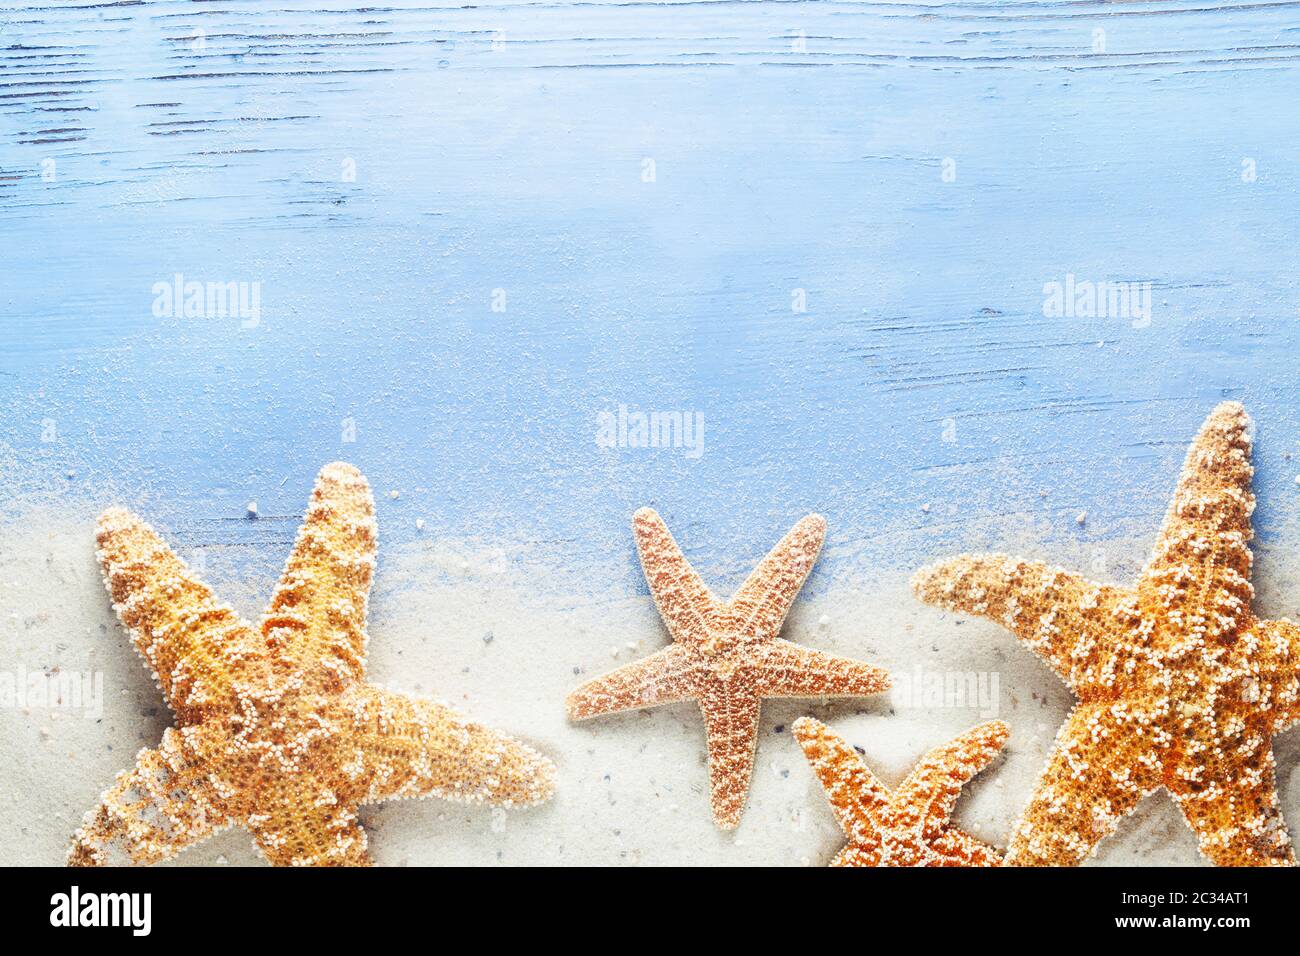 Maritime Background With Sand And Starfish Stock Photo